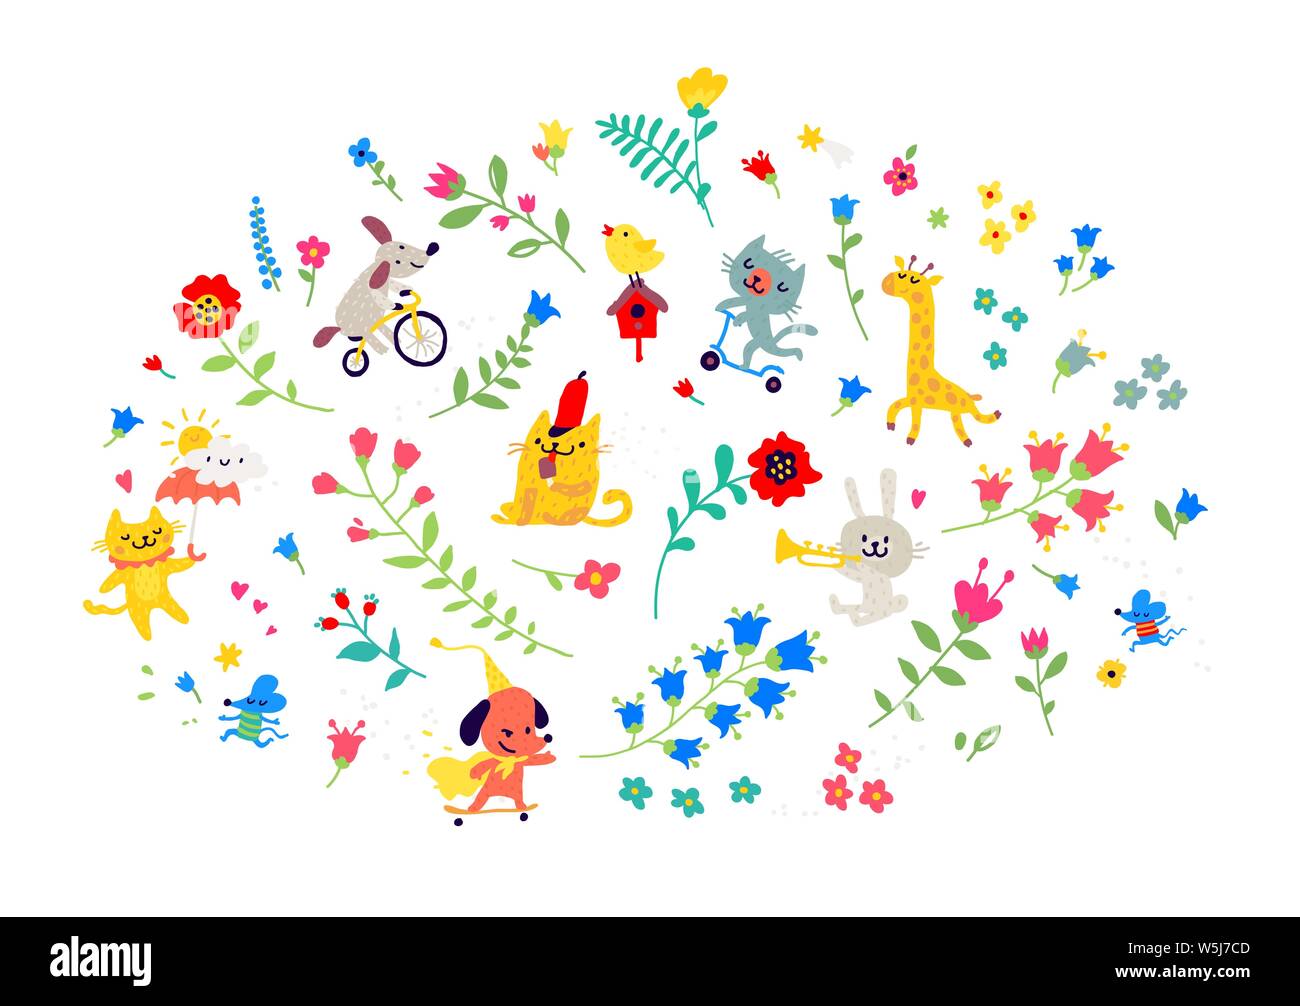 Illustration of a pattern of flowers and funny animals. Vector. Cartoon style. Floral elements for cards or greetings. Children's cosmetics, clothing, Stock Vector